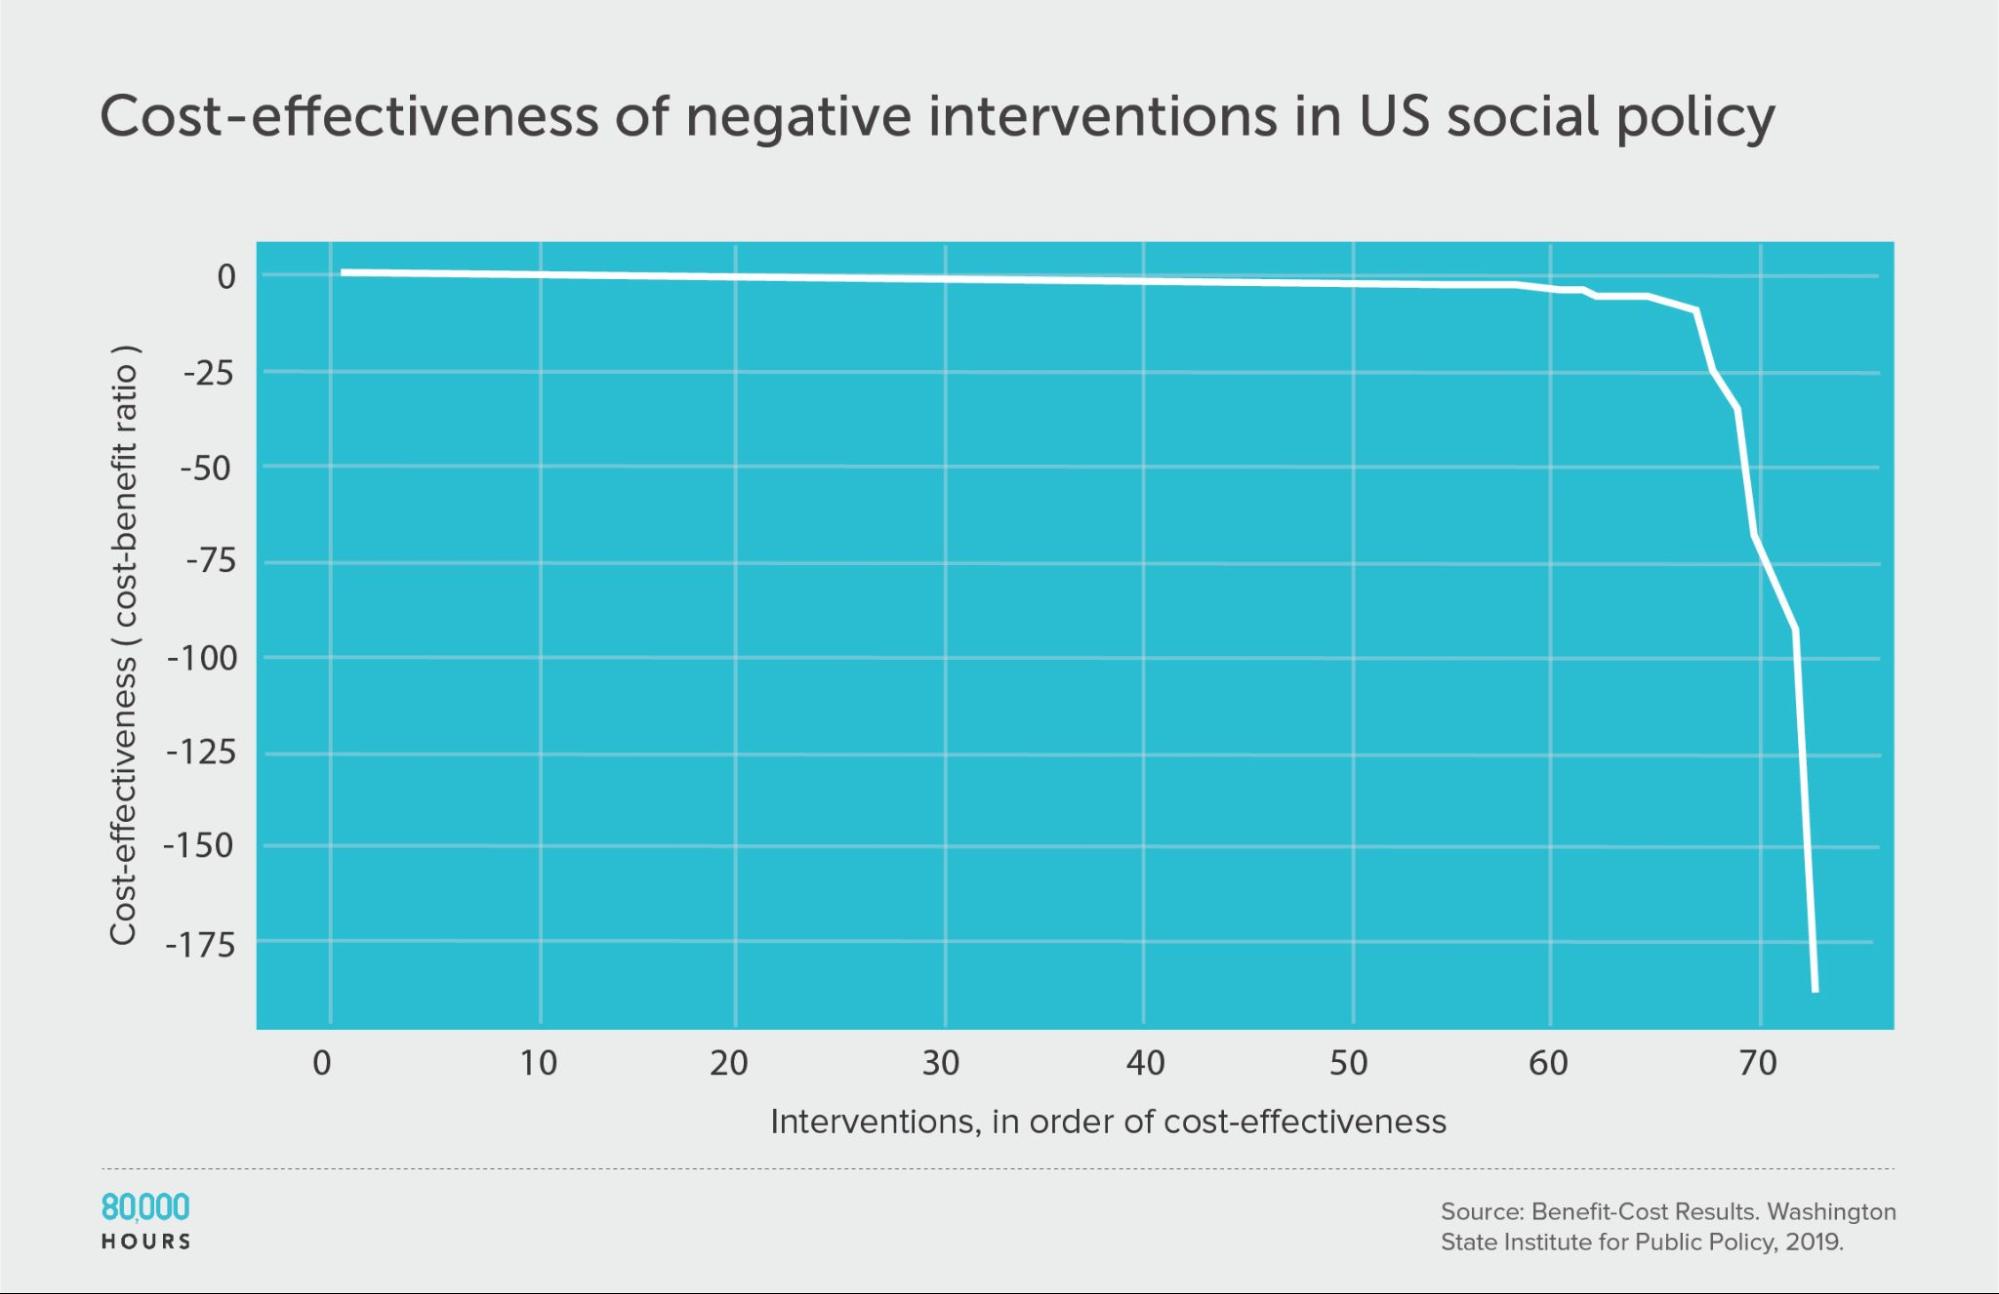 US Social policies, negatives only graph